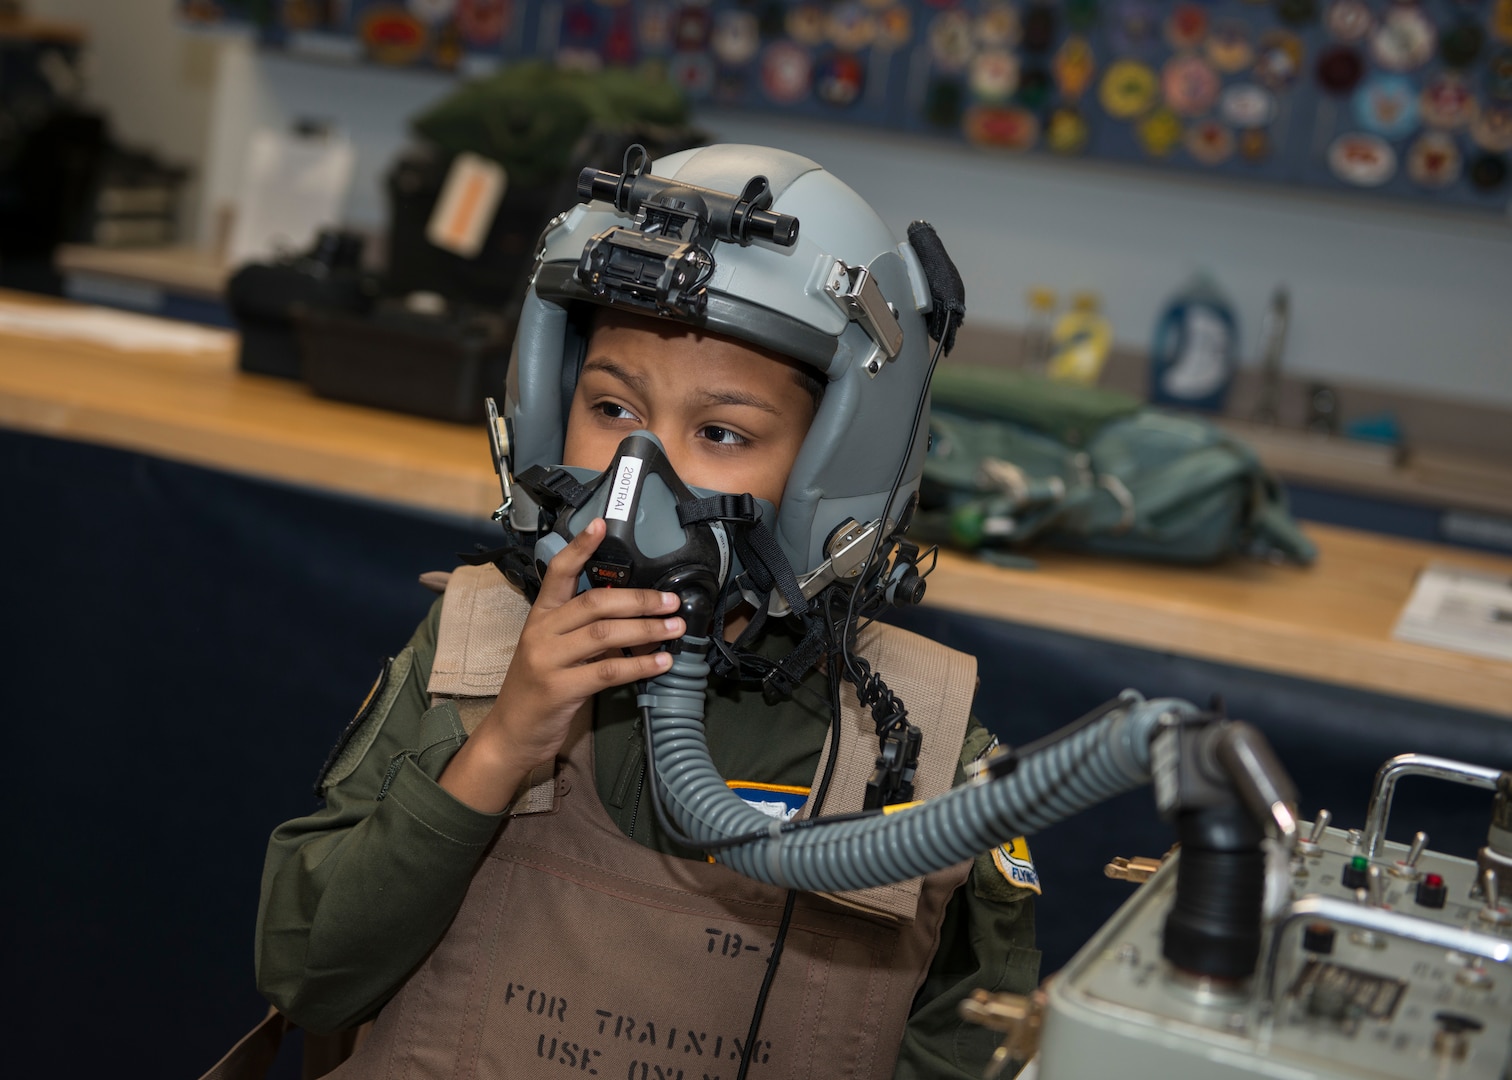 Jadiel Aponte, 103rd Airlift Wing honorary Pilot for a Day, breathes through an oxygen mask at the 103rd Operations Group aircrew flight equipment section during the 103rd Airlift Wing’s annual Pilot for a Day event at Bradley Air National Guard Base, East Granby, Conn. Sept. 19, 2019. The program puts the wing in partnership with local hospitals to identify a child with a life-threatening or terminal illness and bring them on base to meet members of the wing and learn about its mission. (U.S. Air National Guard photo by Staff Sgt. Steven Tucker)